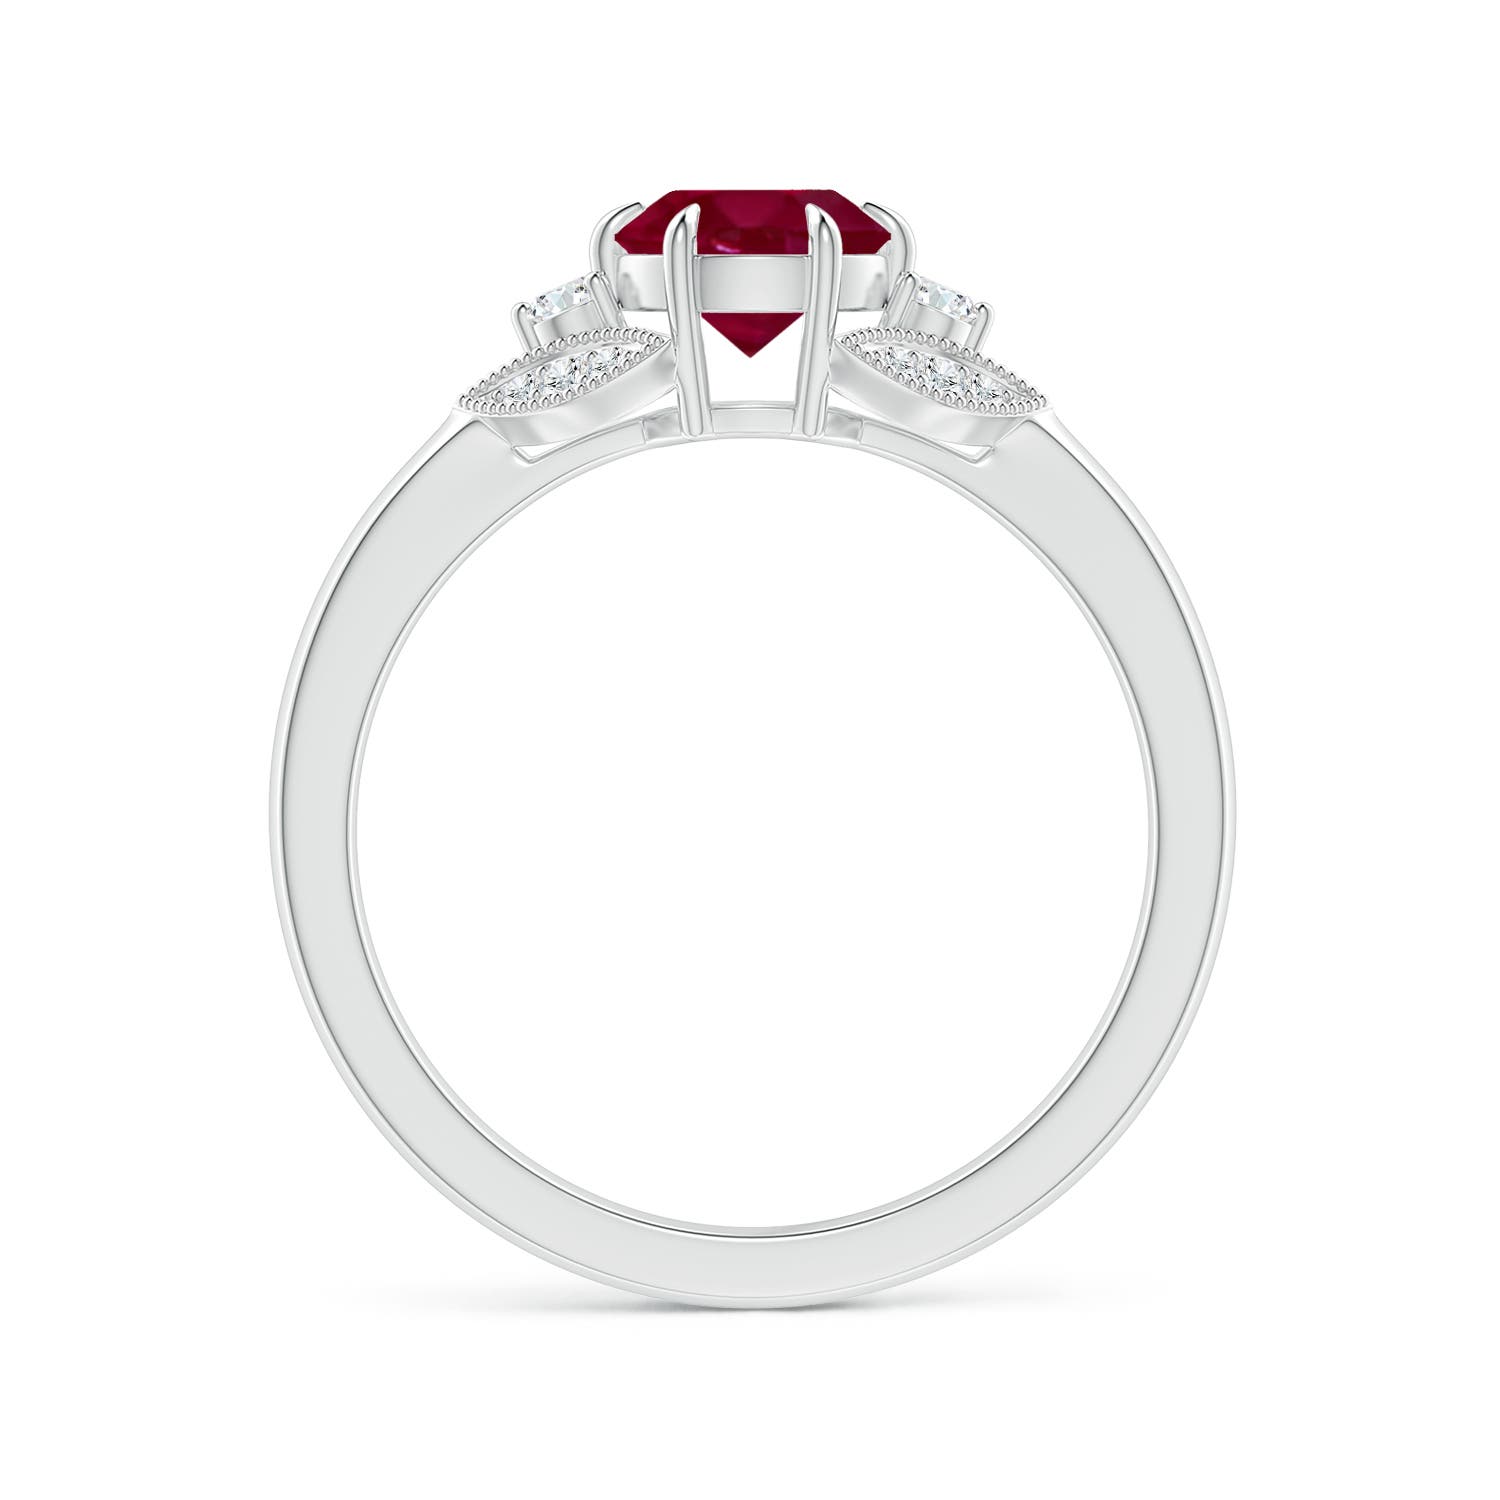 A - Ruby / 1.1 CT / 14 KT White Gold